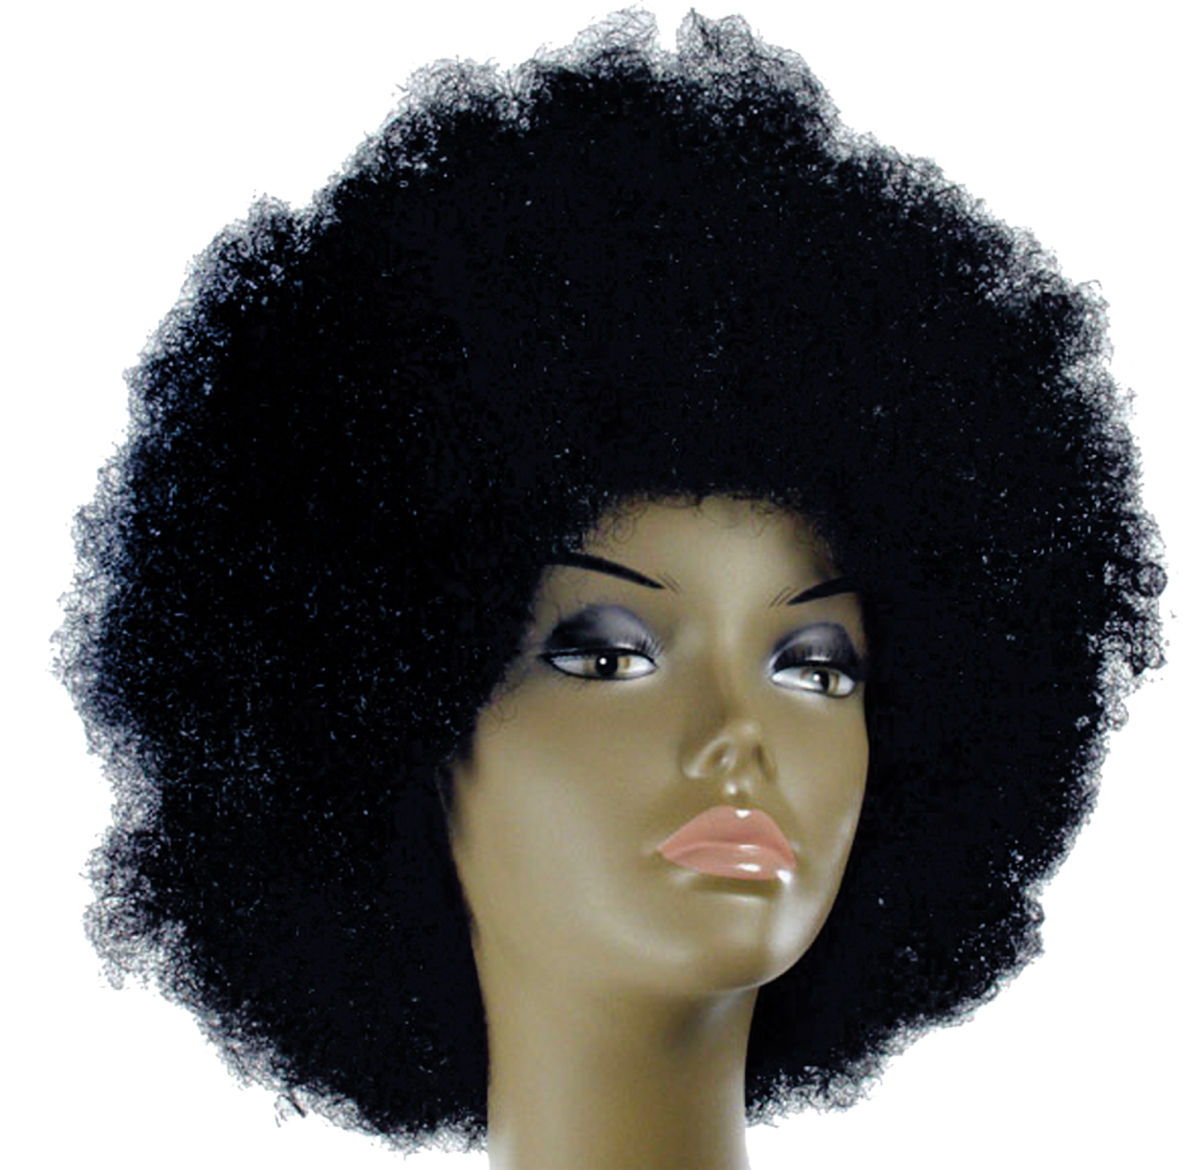 Morris Costumes Lacey Wigs LW524BK Afro Deluxe Wig, Black